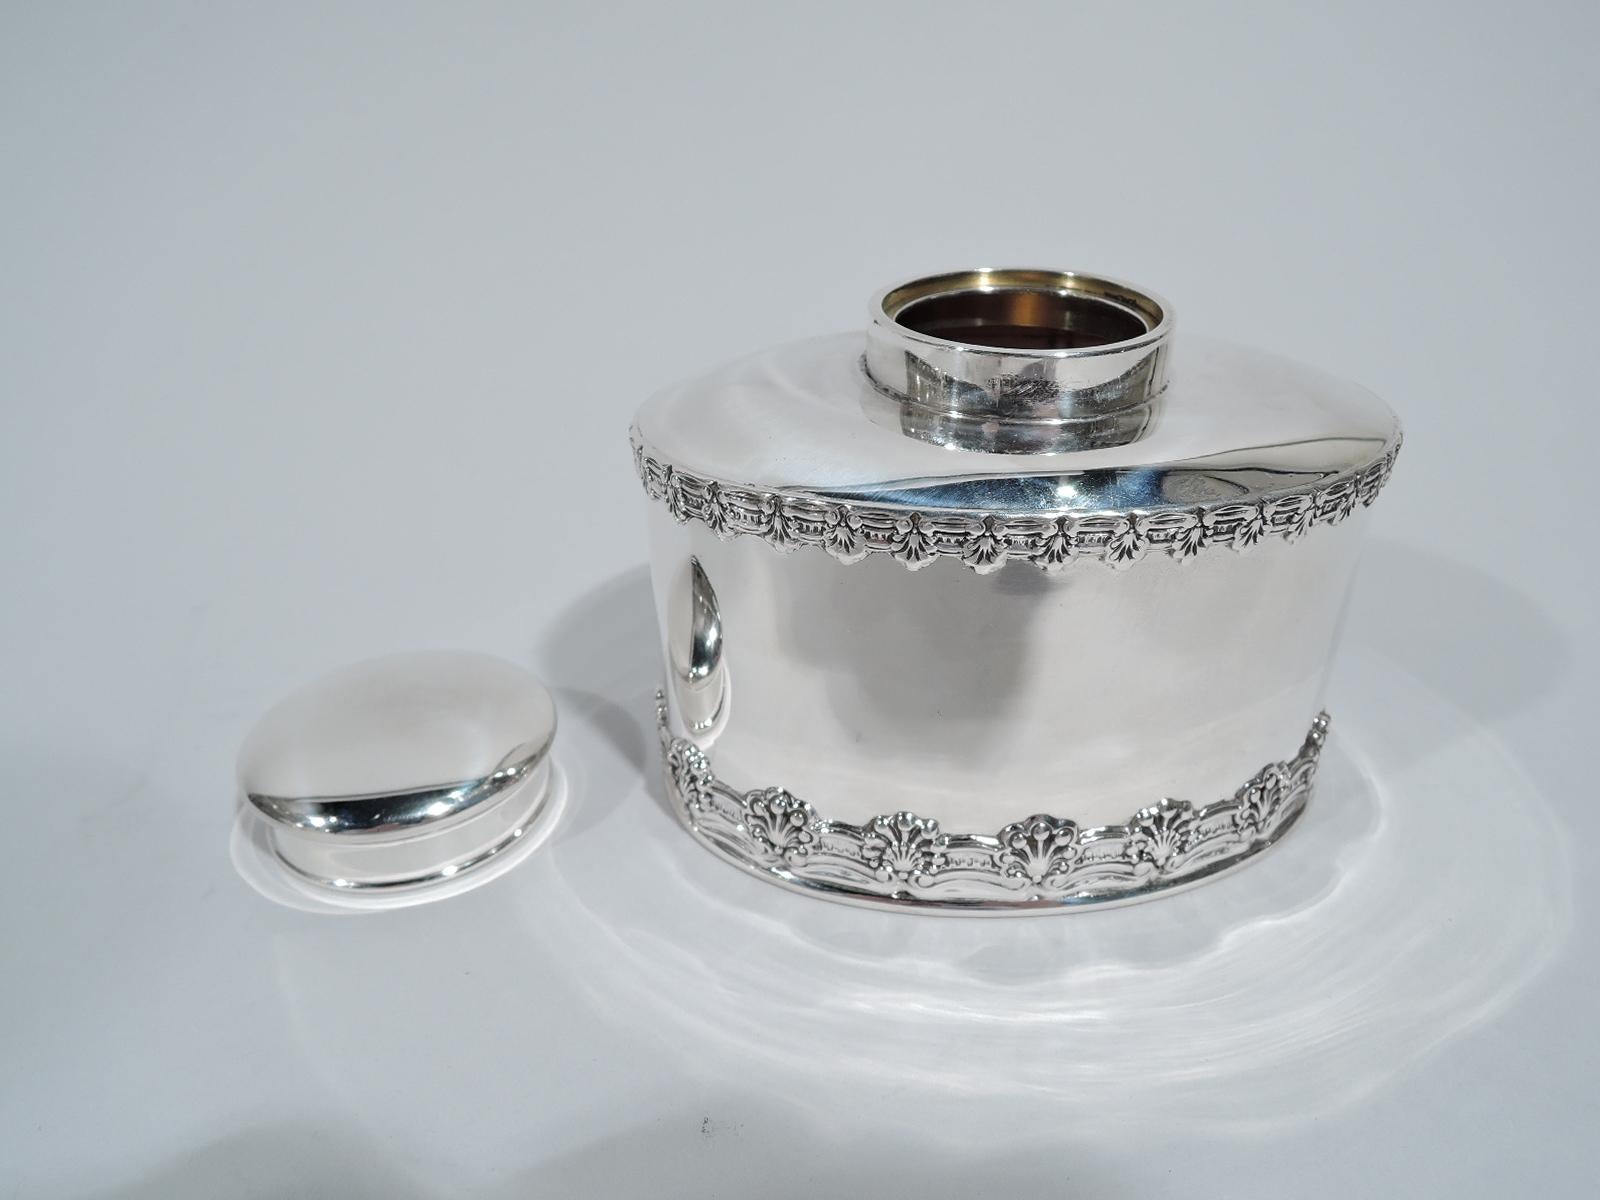 English king sterling silver tea caddy. Made by Tiffany & Co. in New York. Oval with straight sides, curved top, and short inset neck with cover. Sides have ornamental border applied to top and bottom comprising alternating scallop shells and